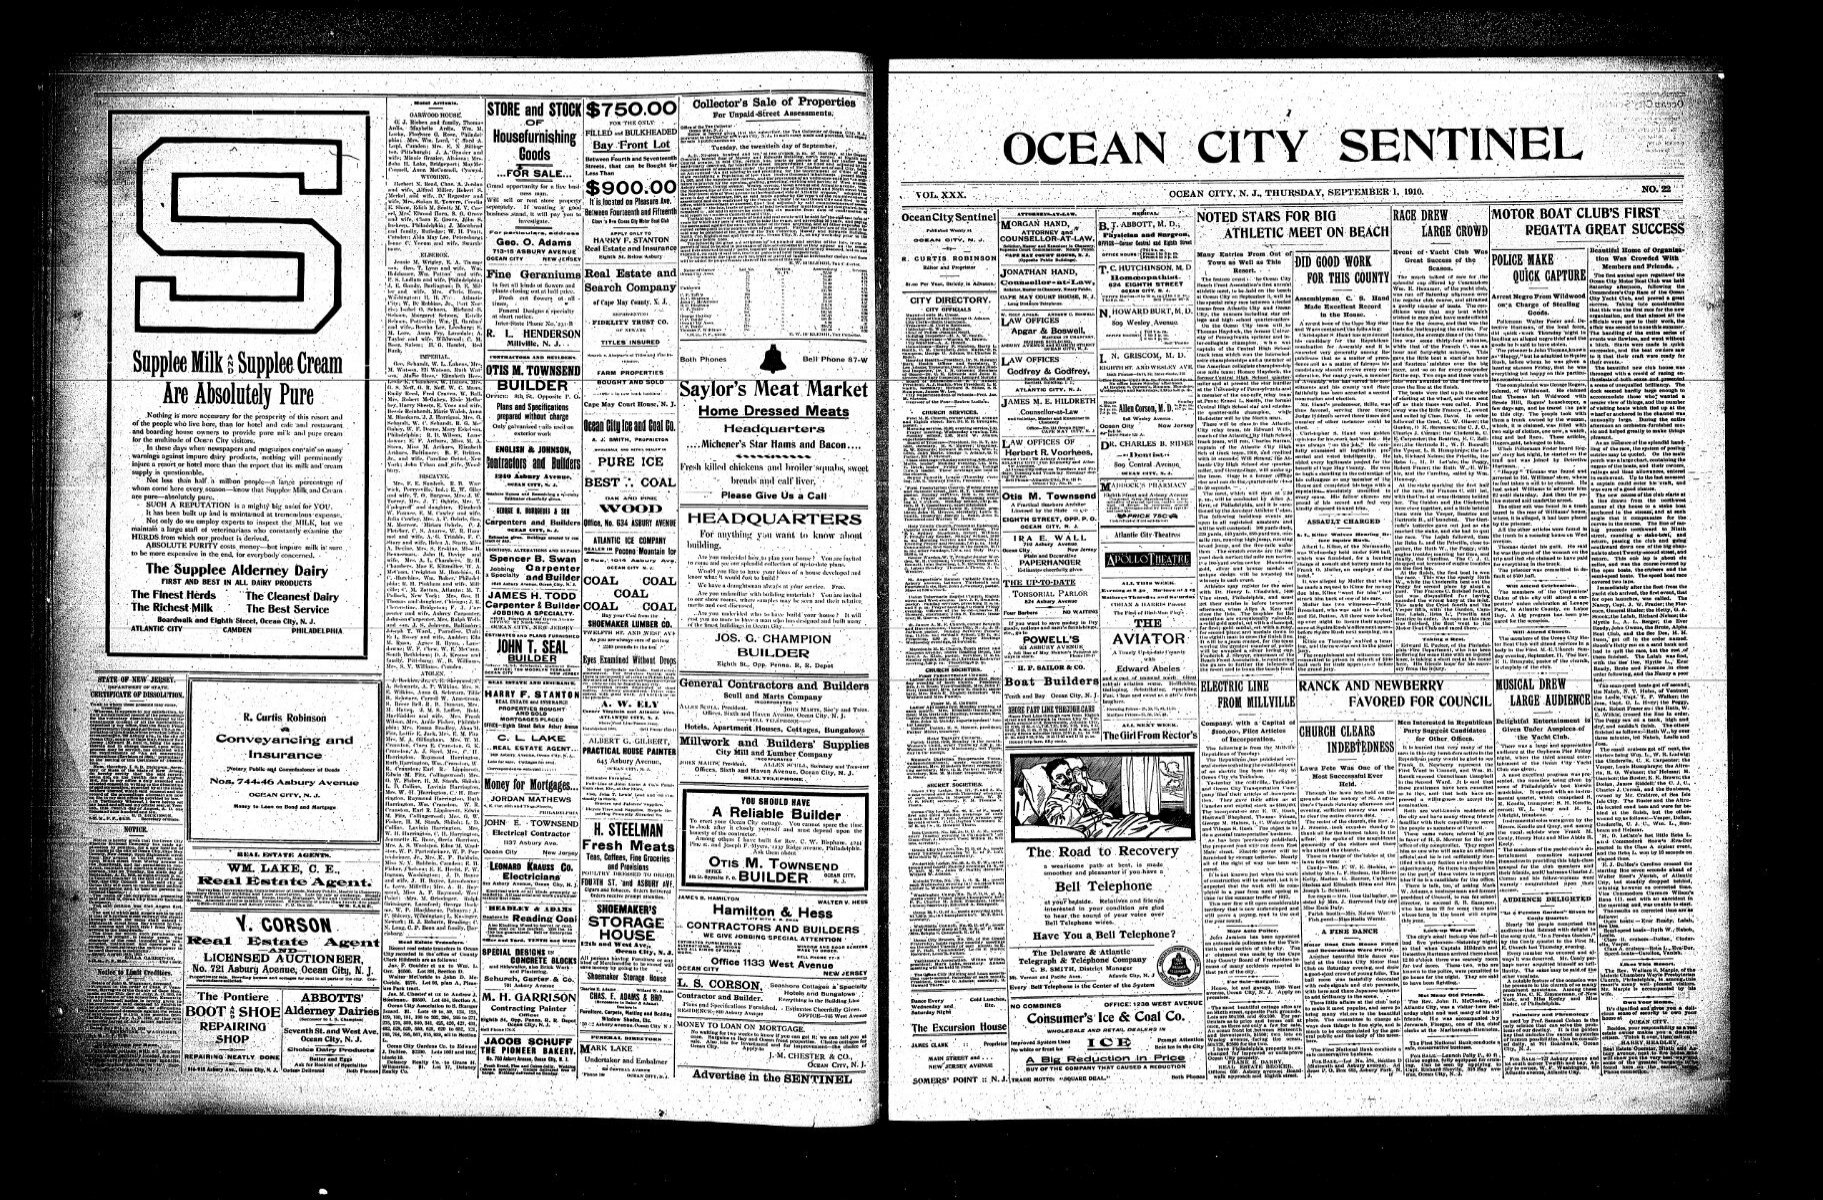 Sep 1910 - On-Line Newspaper Archives of Ocean City